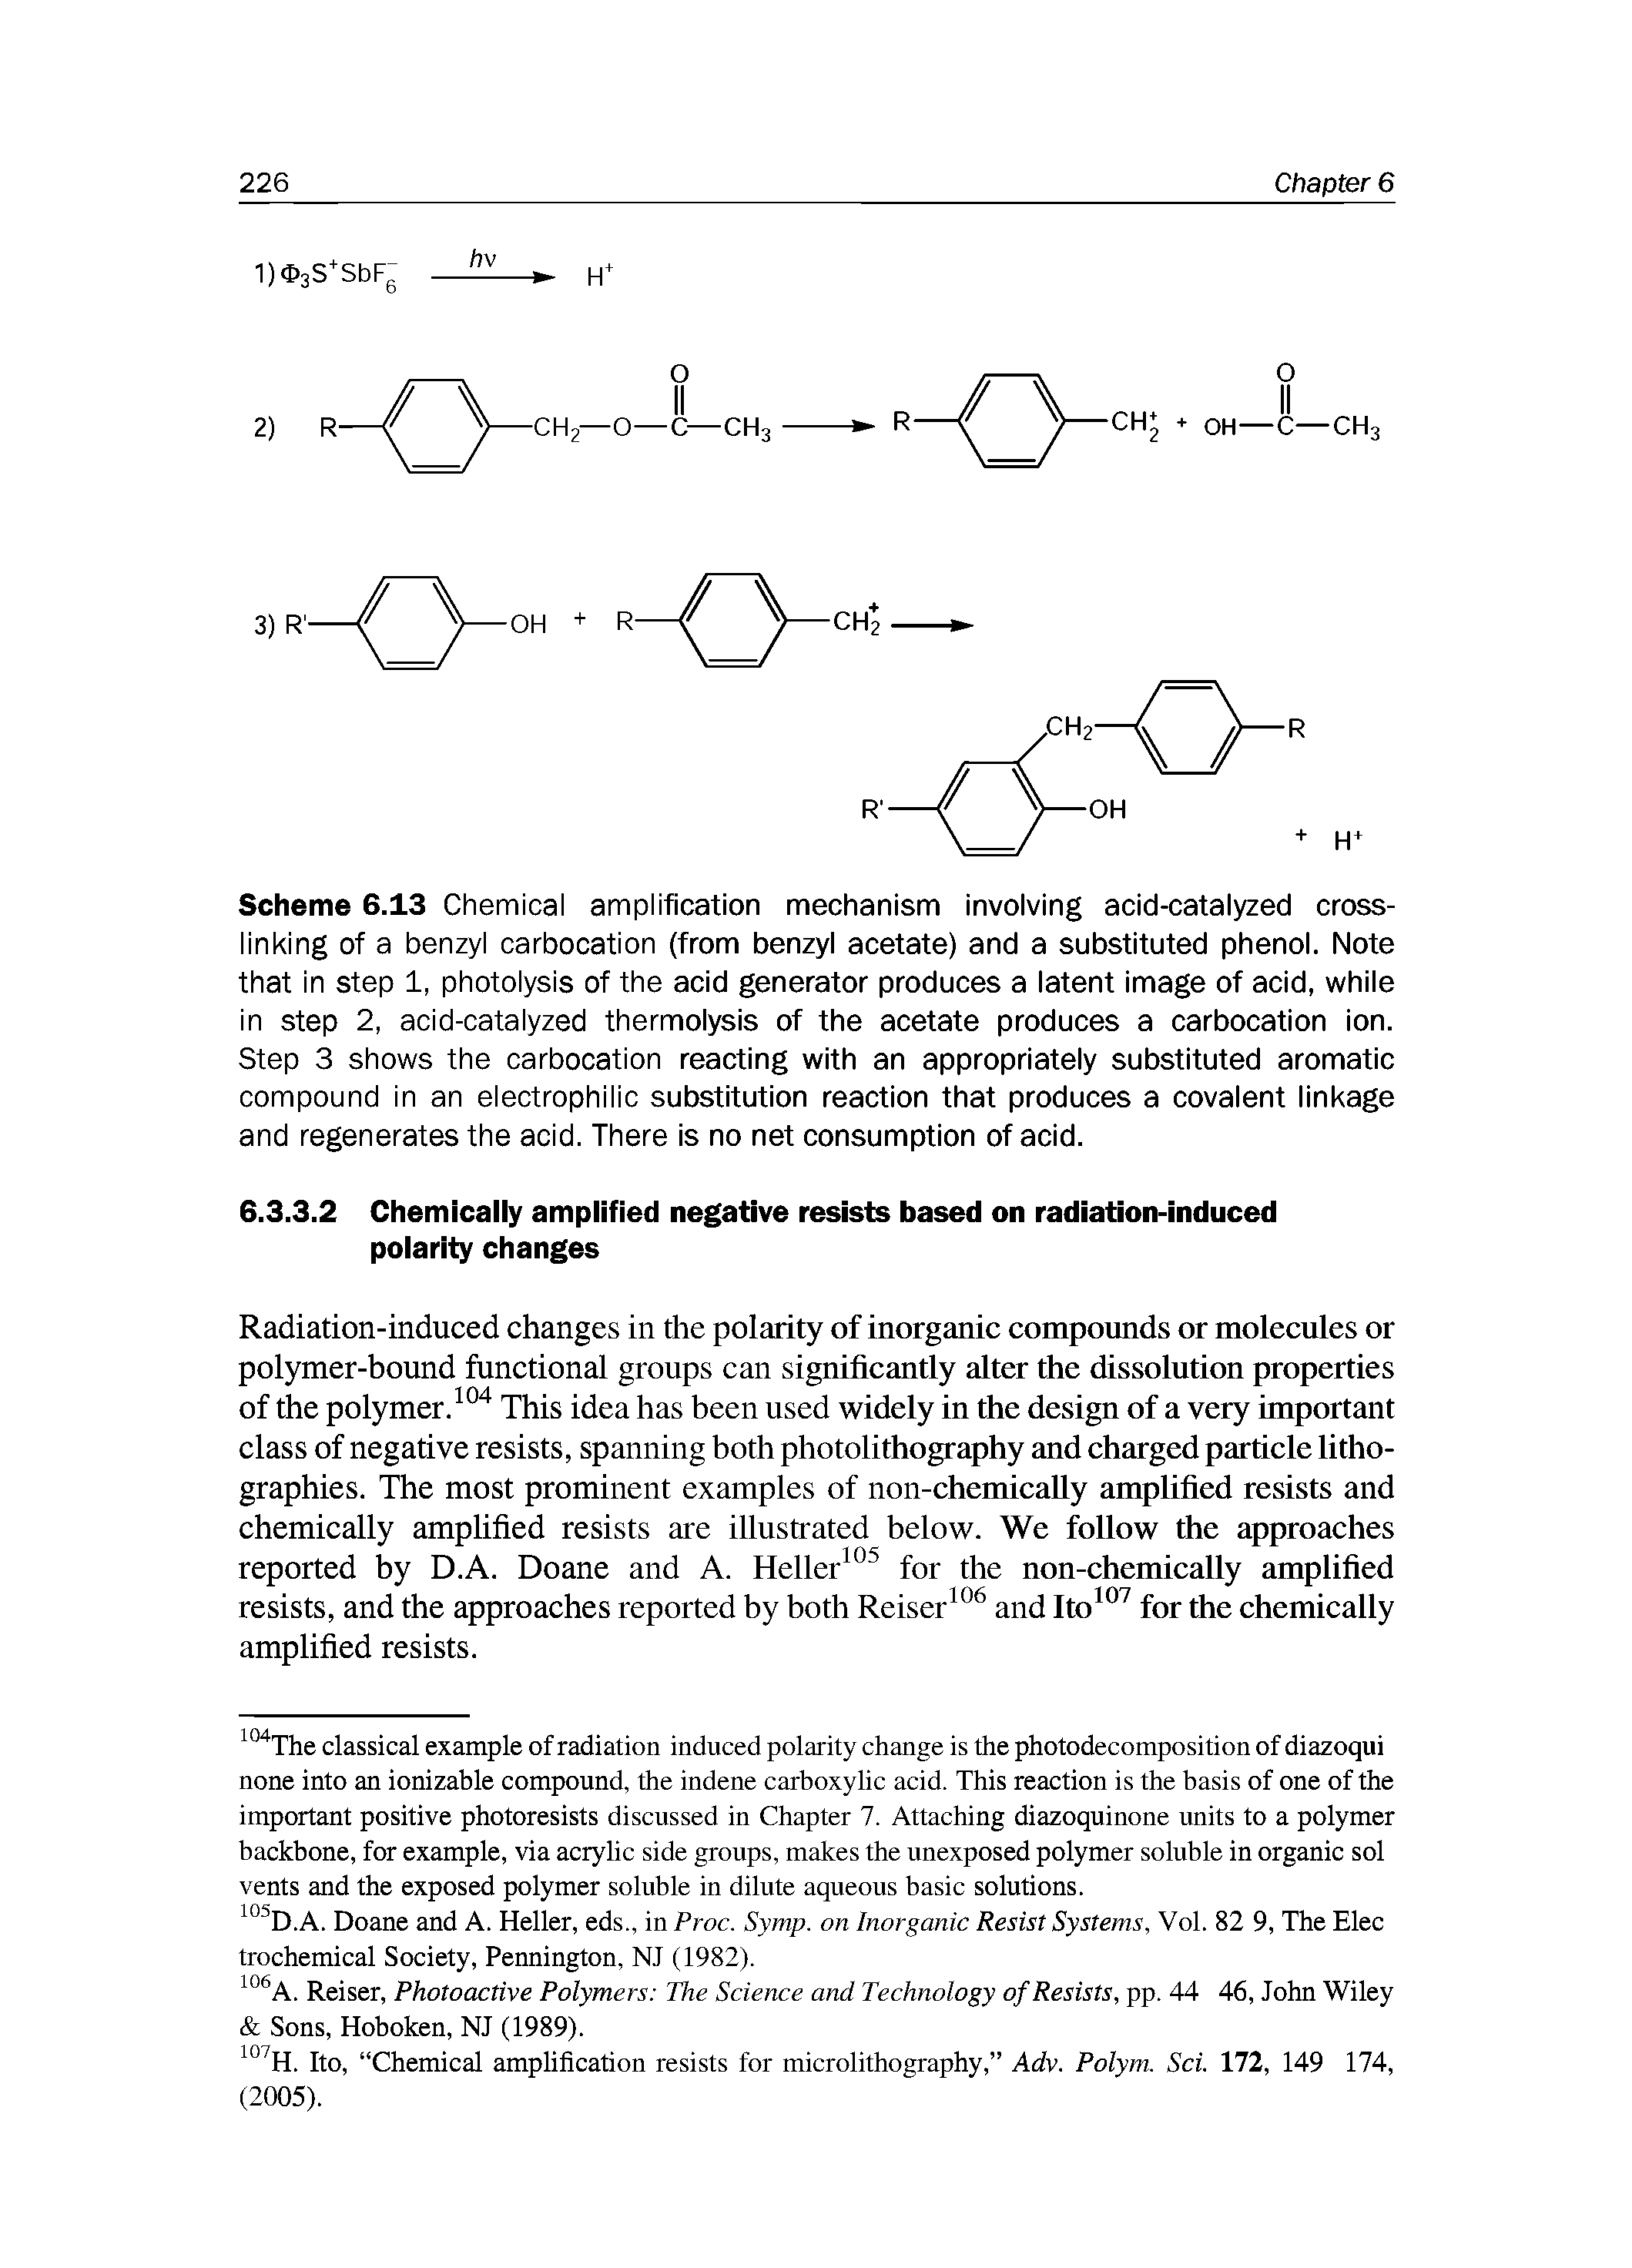 Scheme 6.13 Chemical amplification mechanism involving acid-catalyzed cross-linking of a benzyl carbocation (from benzyl acetate) and a substituted phenol. Note that in step 1, photolysis of the acid generator produces a latent image of acid, while in step 2, acid-catalyzed thermolysis of the acetate produces a carbocation ion. Step 3 shows the carbocation reacting with an appropriately substituted aromatic compound in an electrophilic substitution reaction that produces a covalent linkage and regenerates the acid. There is no net consumption of acid.